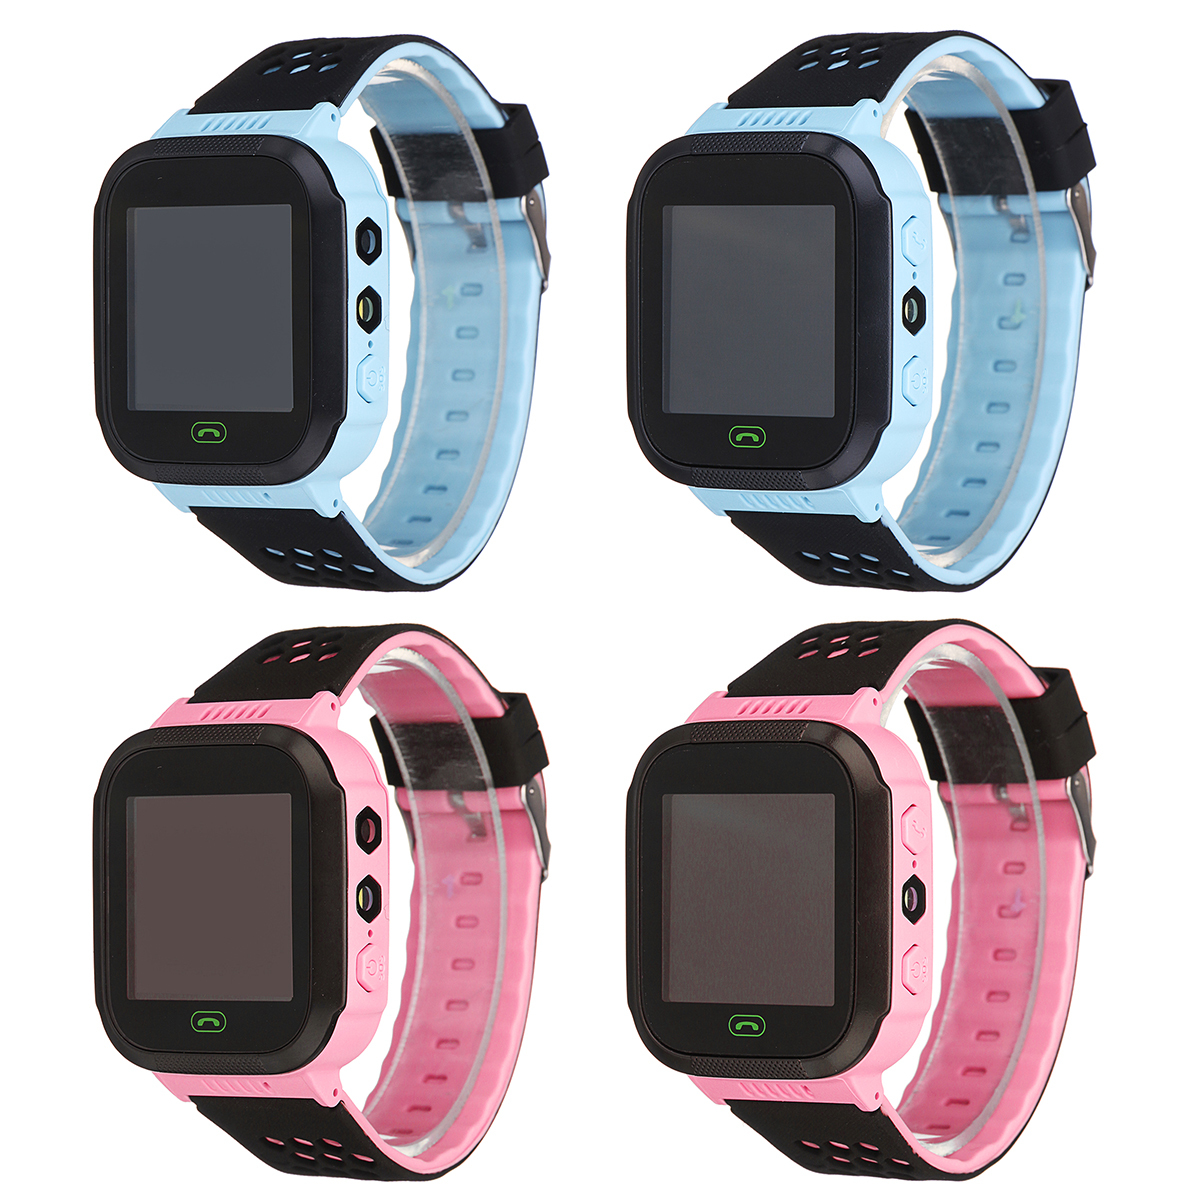 Bakeey Waterproof Tracker SOS Call Children Smart Watch For Android IOS 1